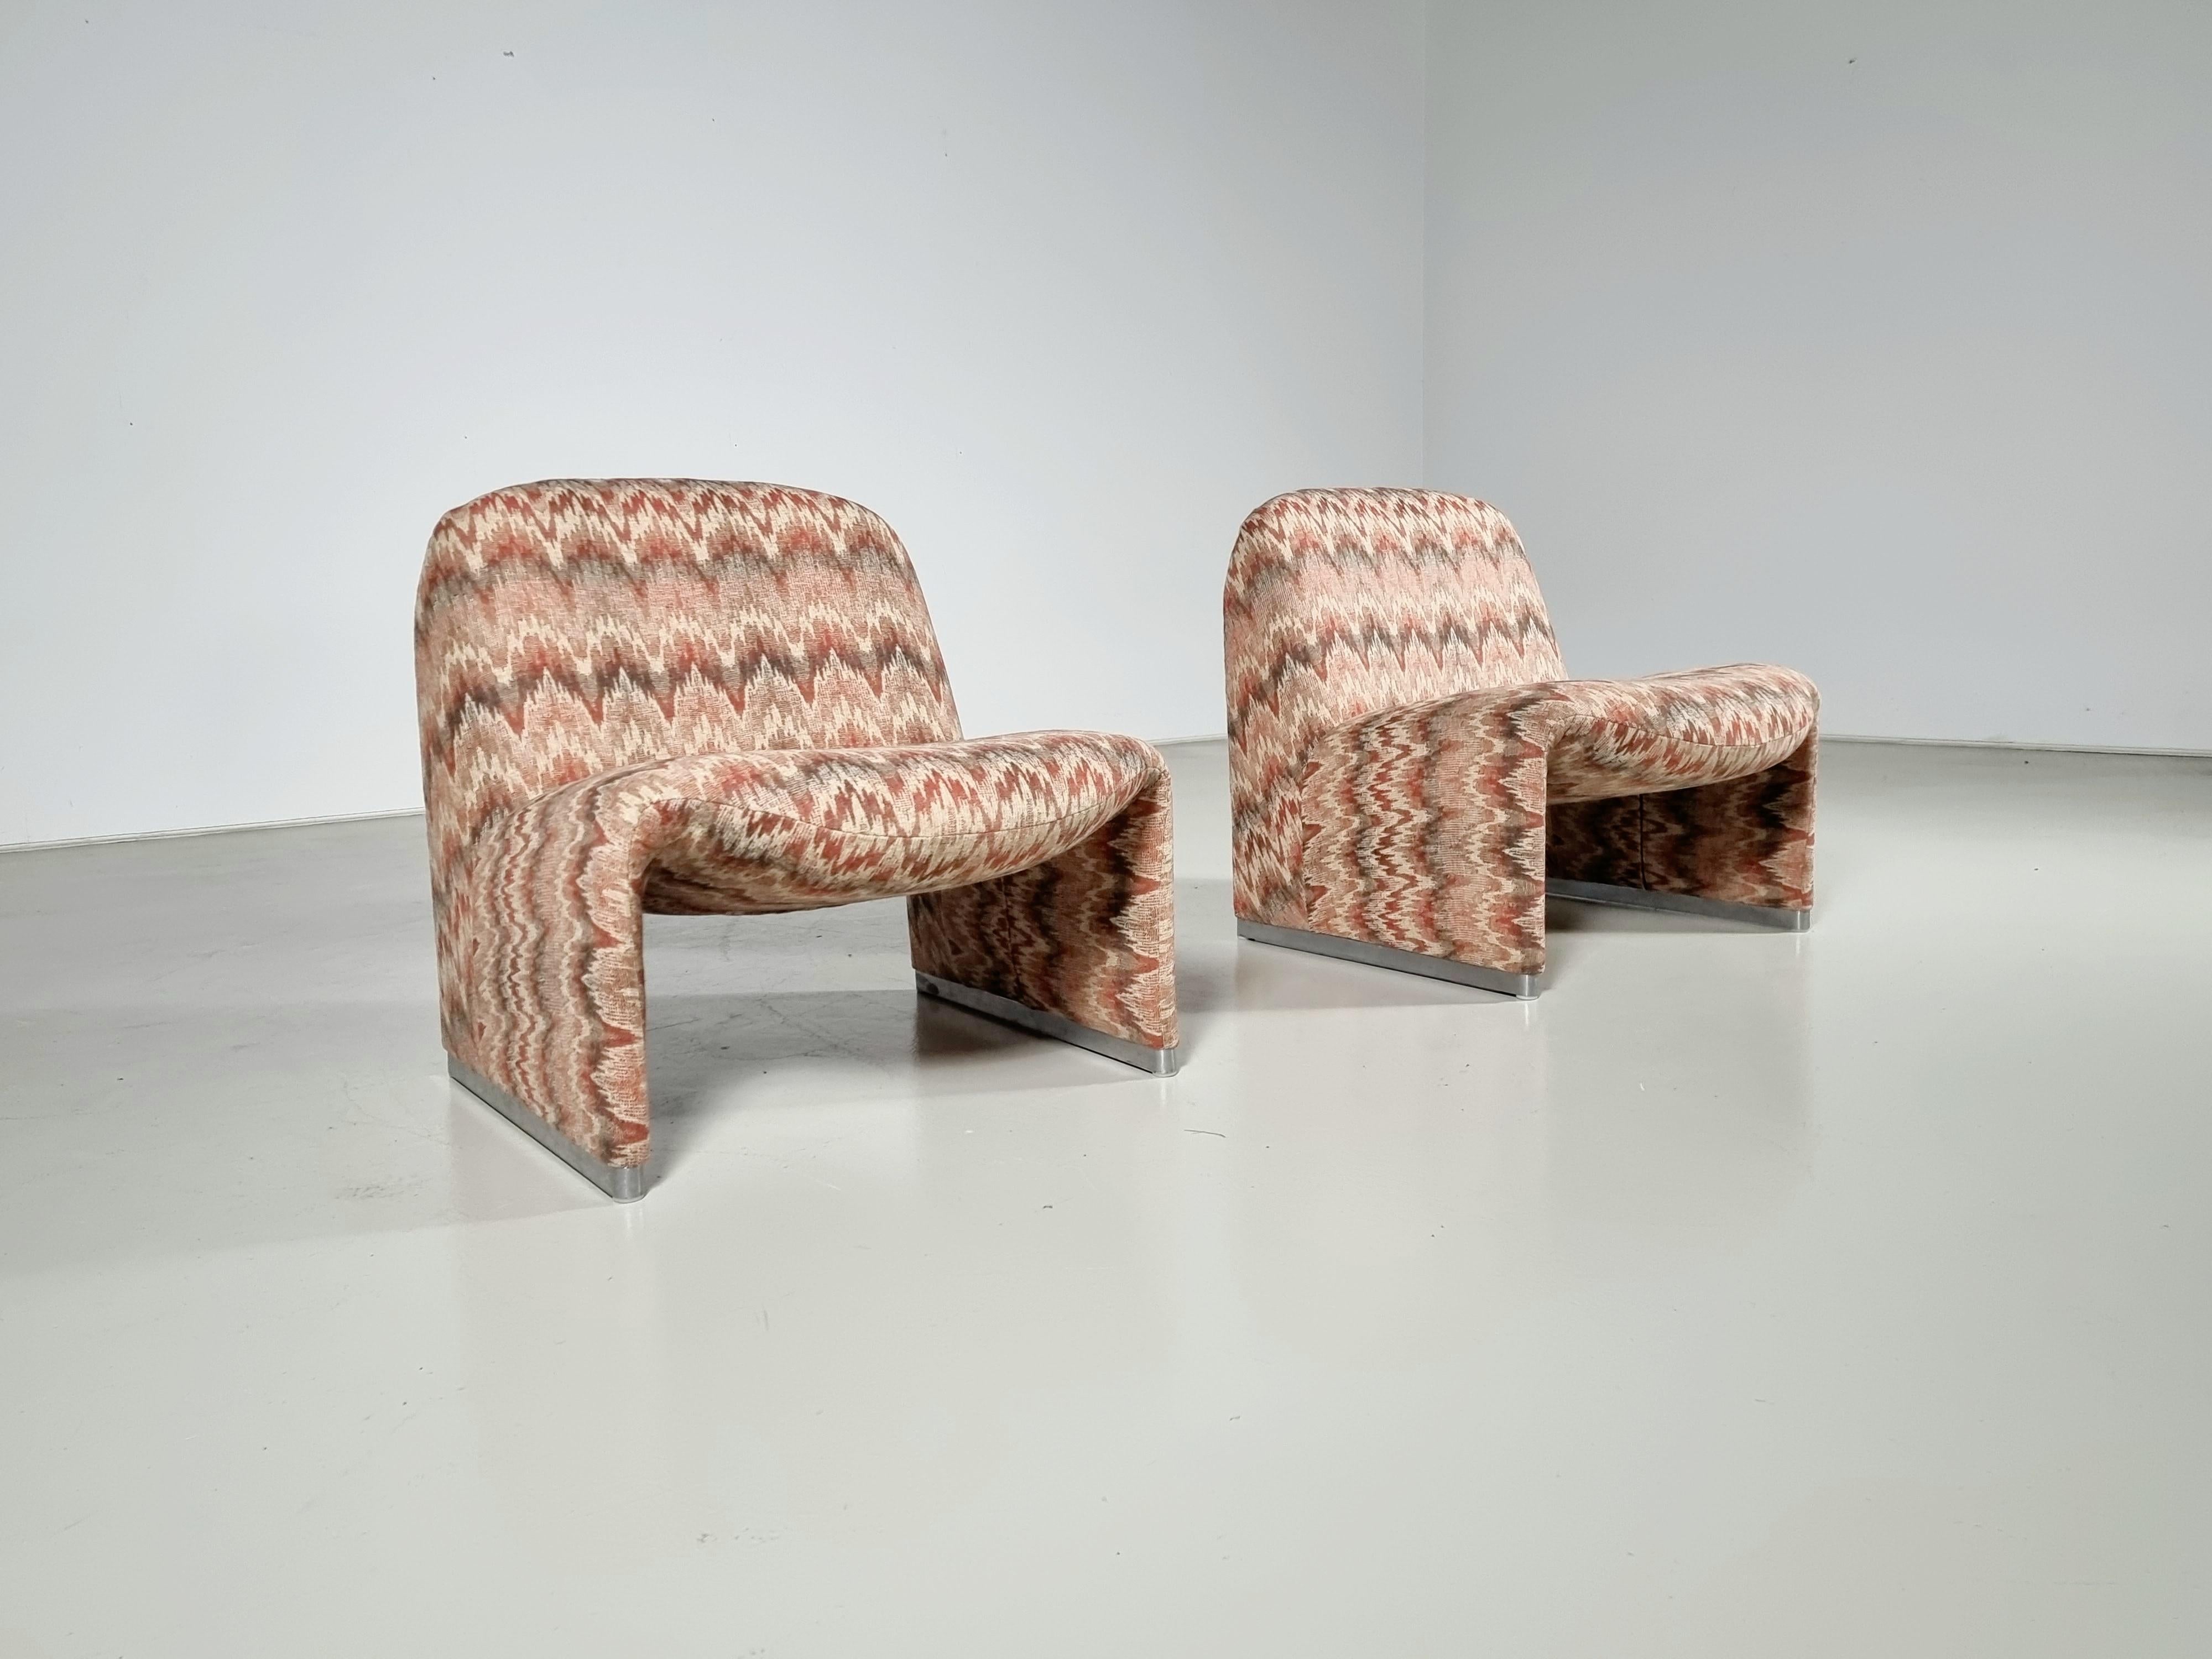 Giancarlo Piretti Alky chairs. Produced by Castelli and Artifor in the 1970s. Reupholstered in stunning wool fabric with amazing print. Aluminum frame and polished chrome footrests. Beautiful organic curves are reminiscent of Pierre Paulin's designs.